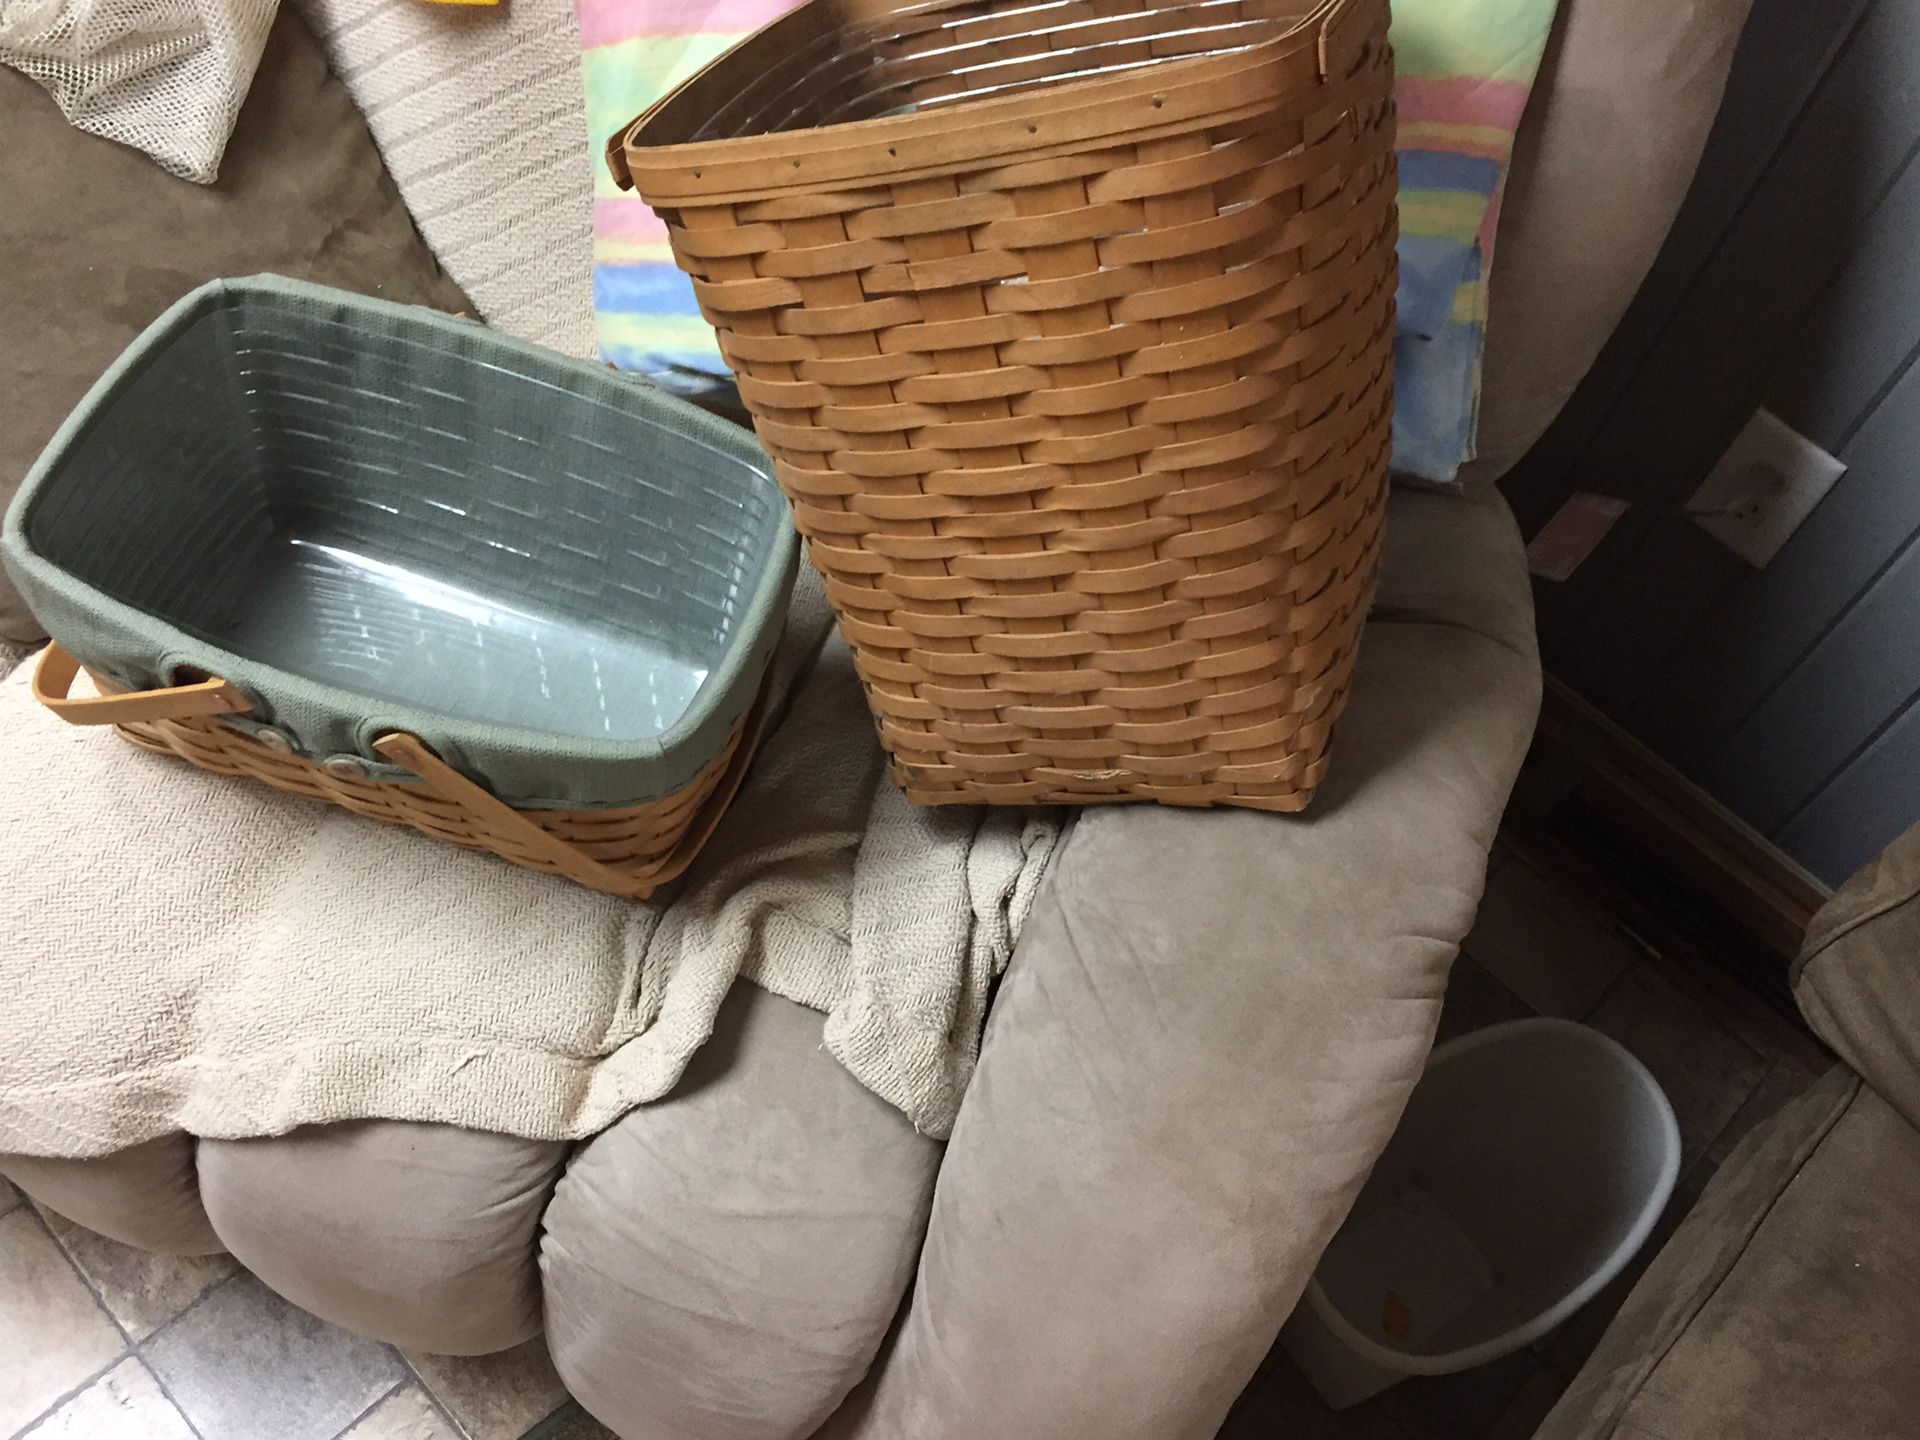 Longaberger Baskets Authentic $50 for both